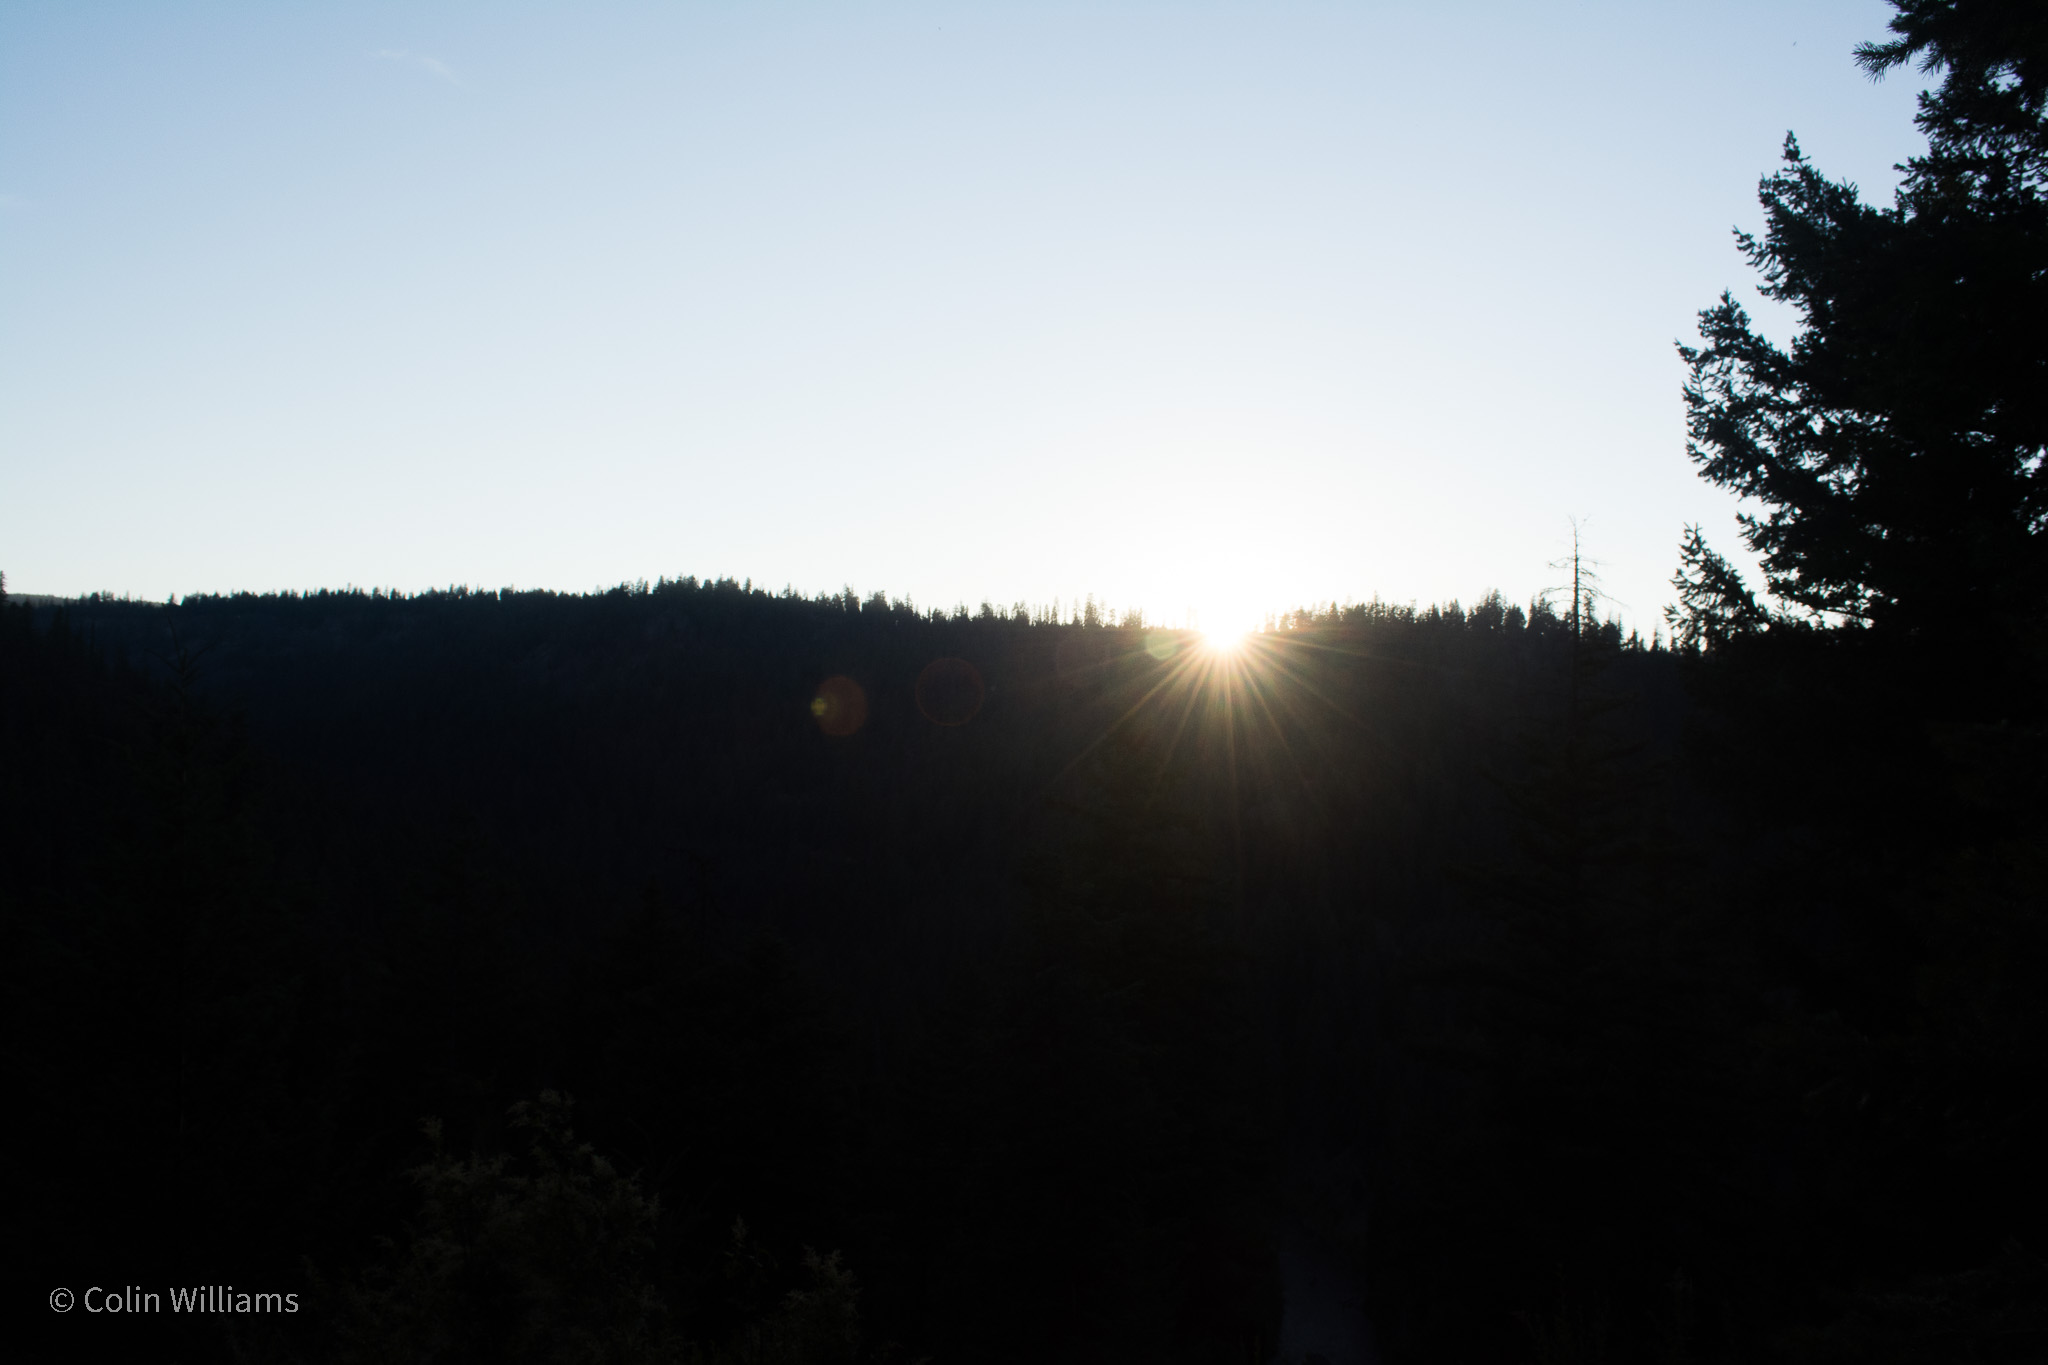 Bright sunrise over a shadowed, forested hill.